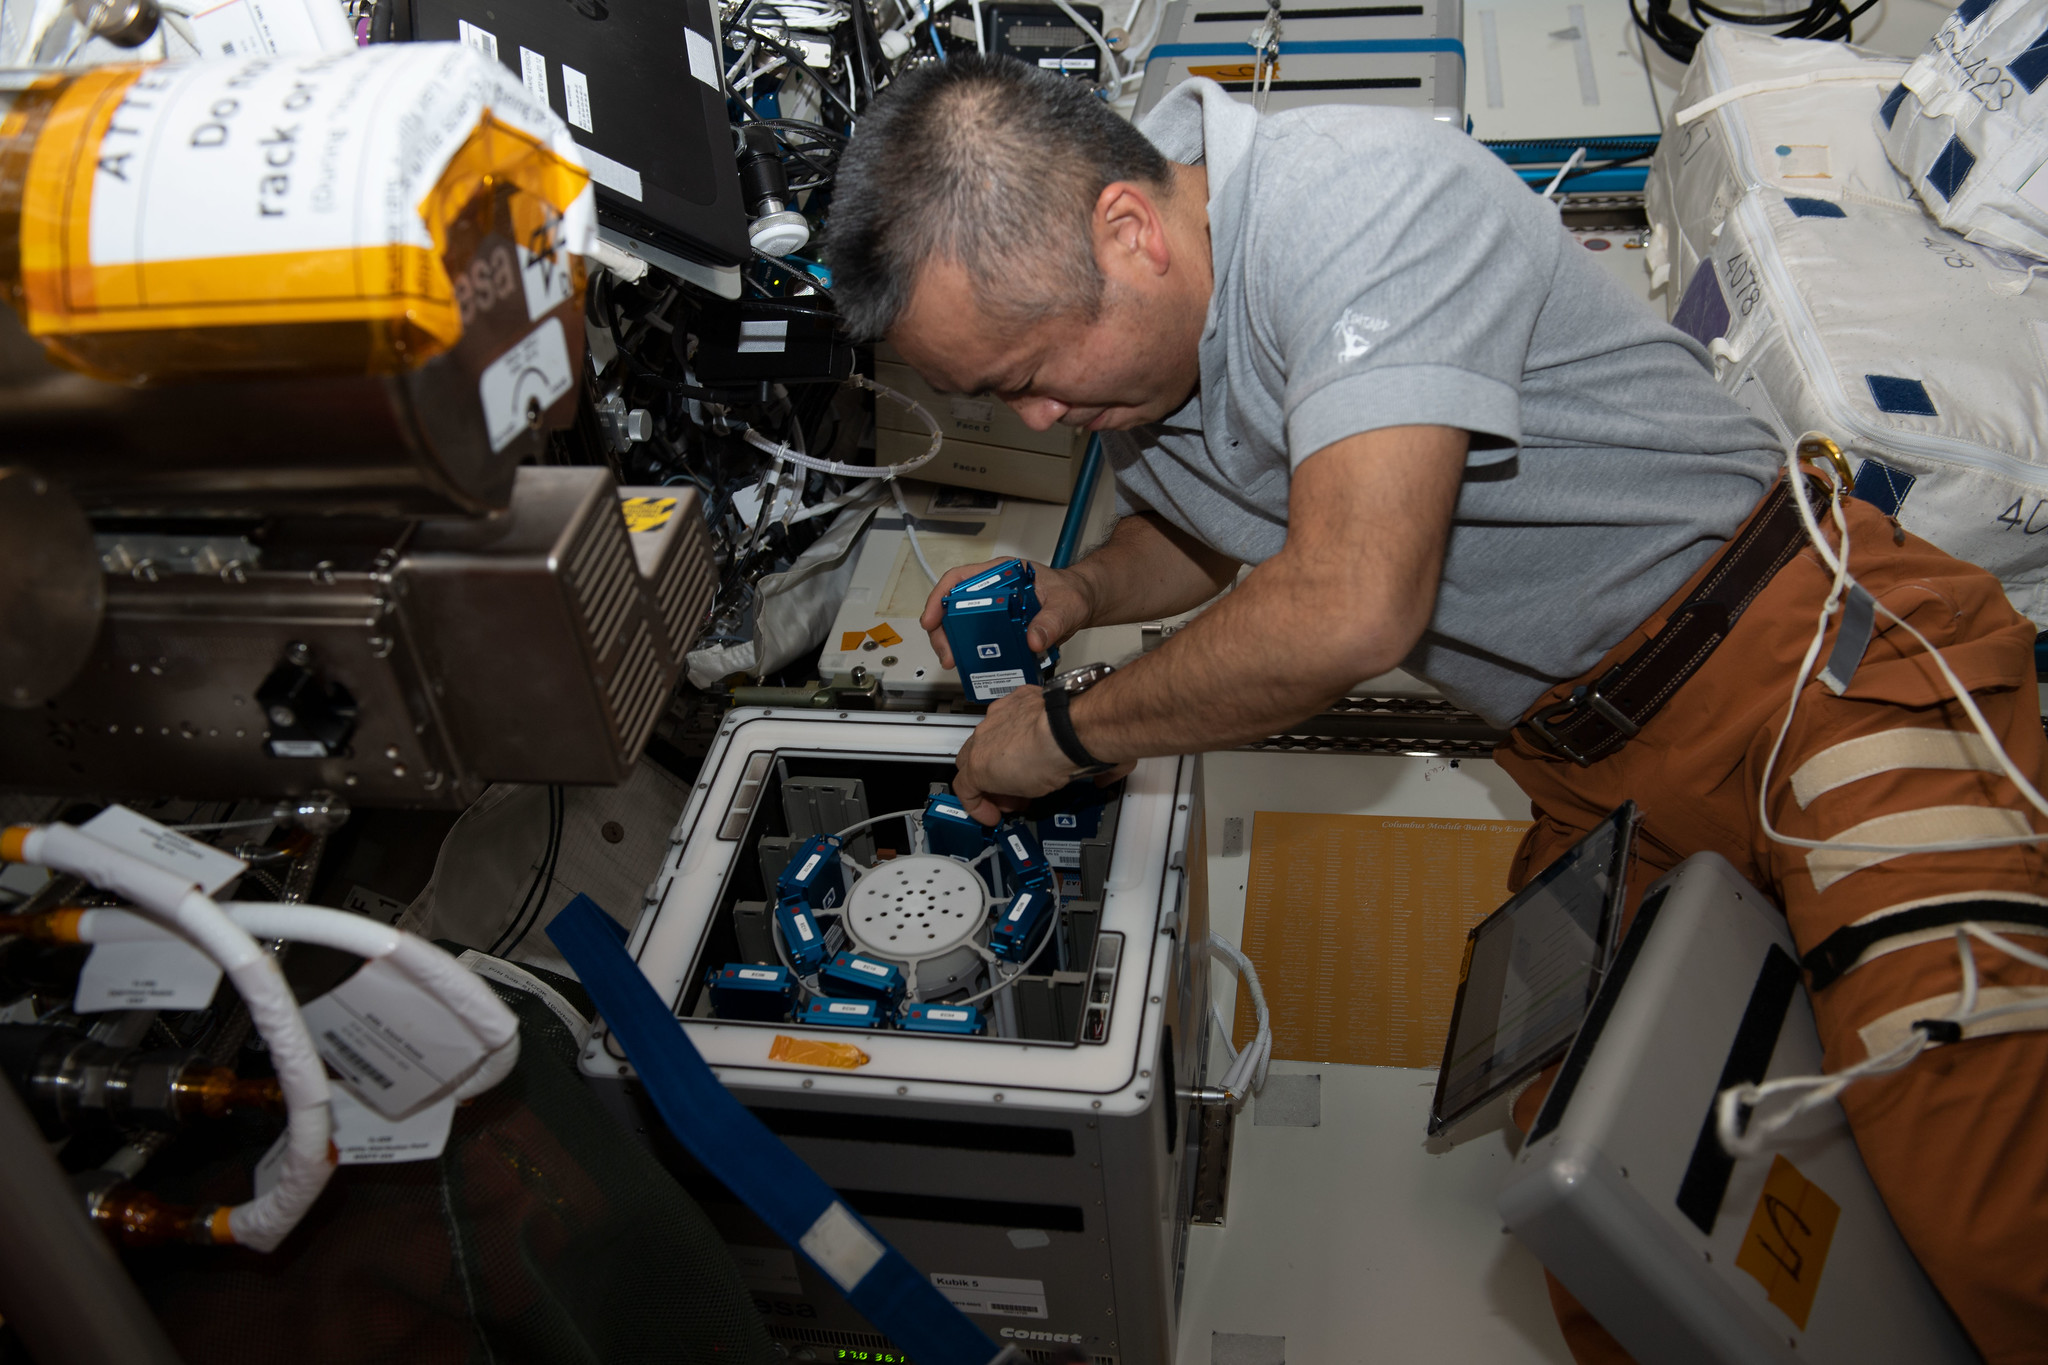 Image of Koichi Wakata of the Japan Aerospace Exploration Agency (JAXA) removing experiment containers for the Antioxidant Protection investigation from the Kubik temperature-controlled incubator. 